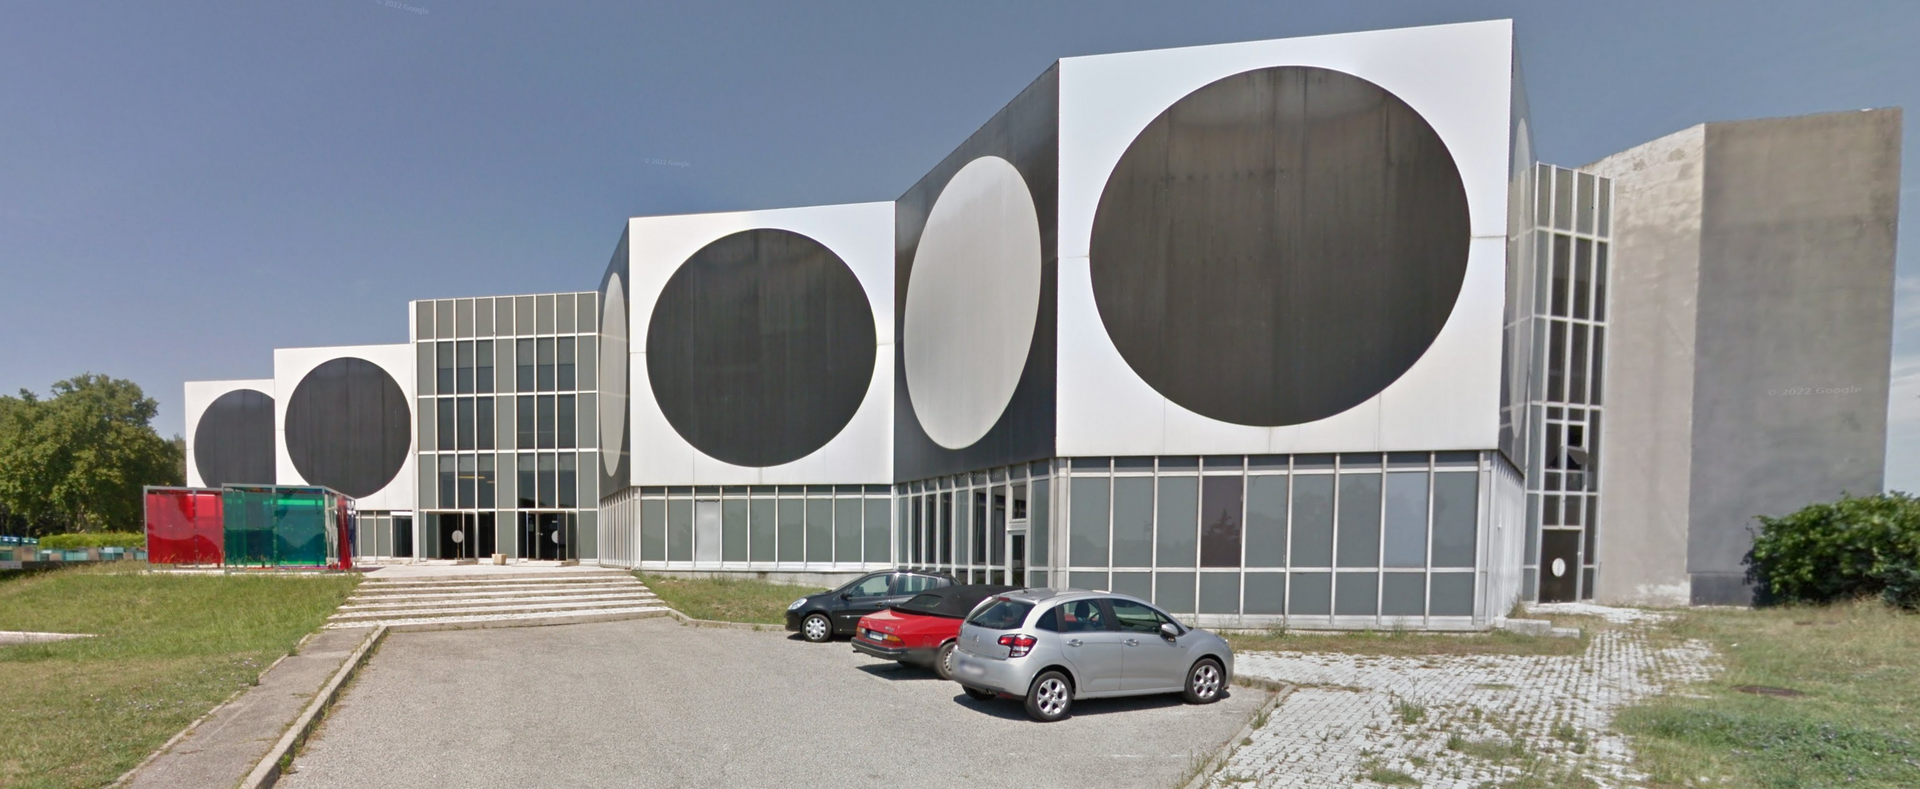 Fondation Vasarely by Google Earth